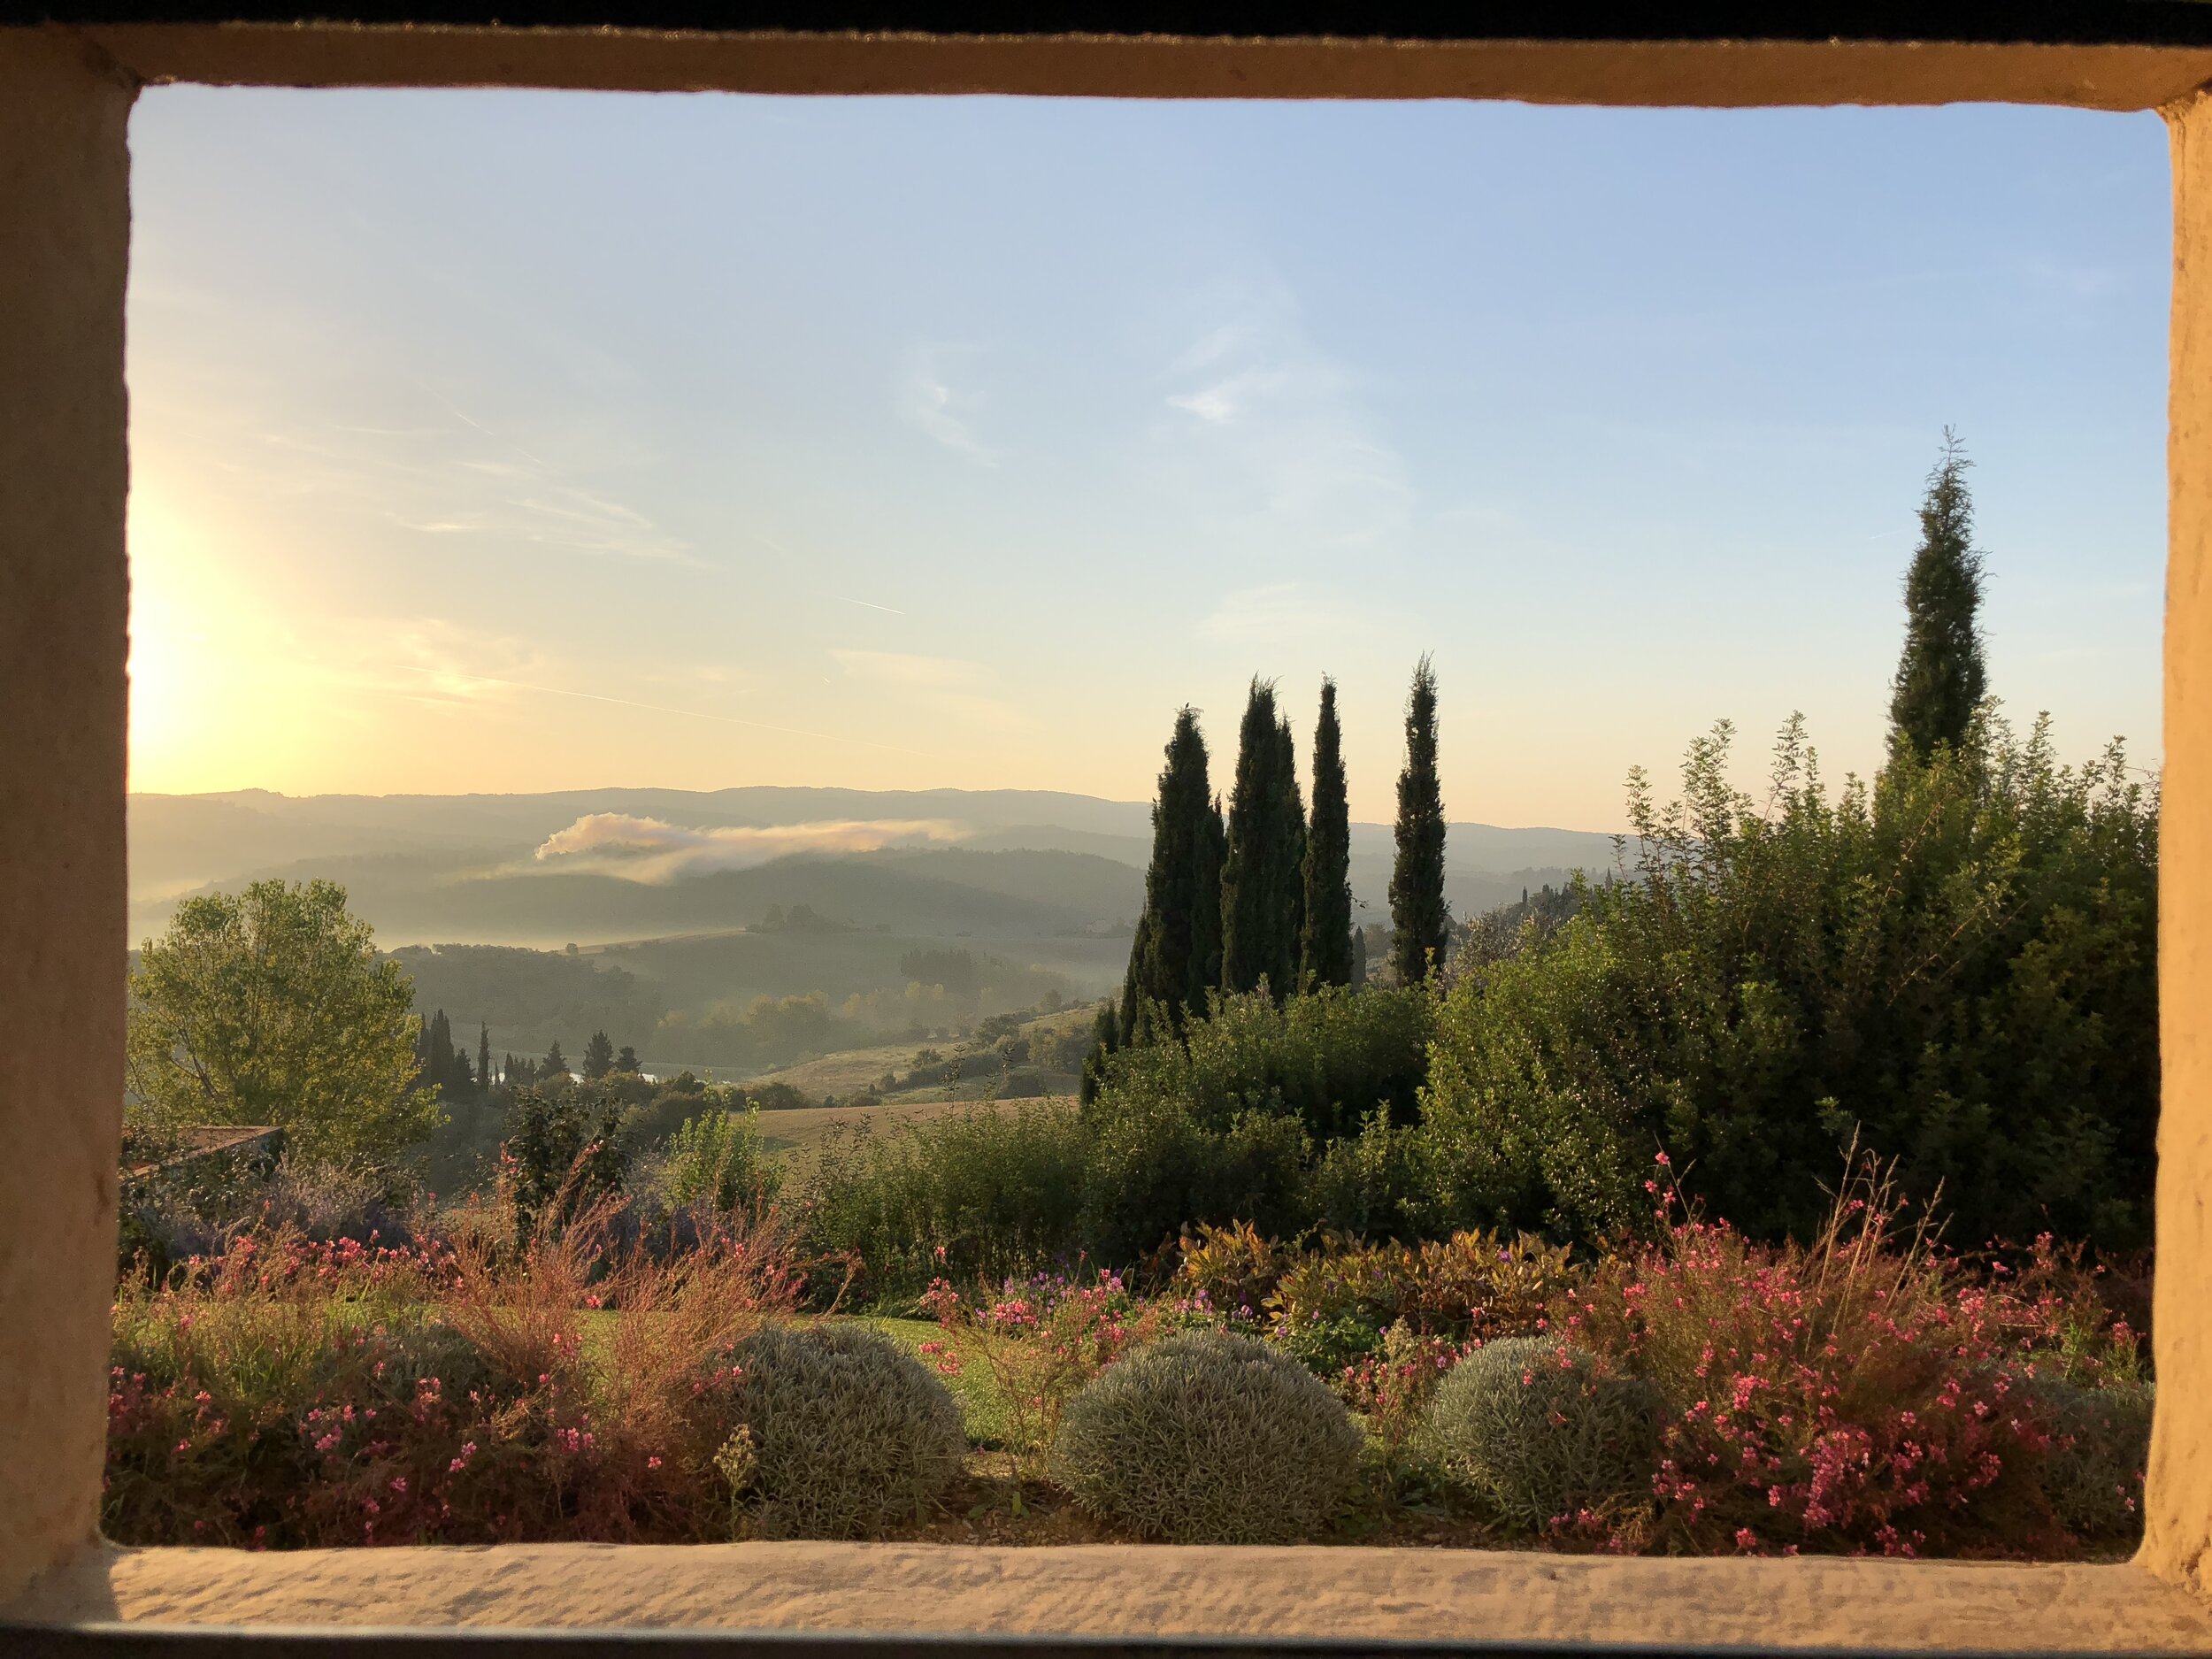 A view out the window | EAT.PRAY.MOVE Retreats | Chianti, Italy 